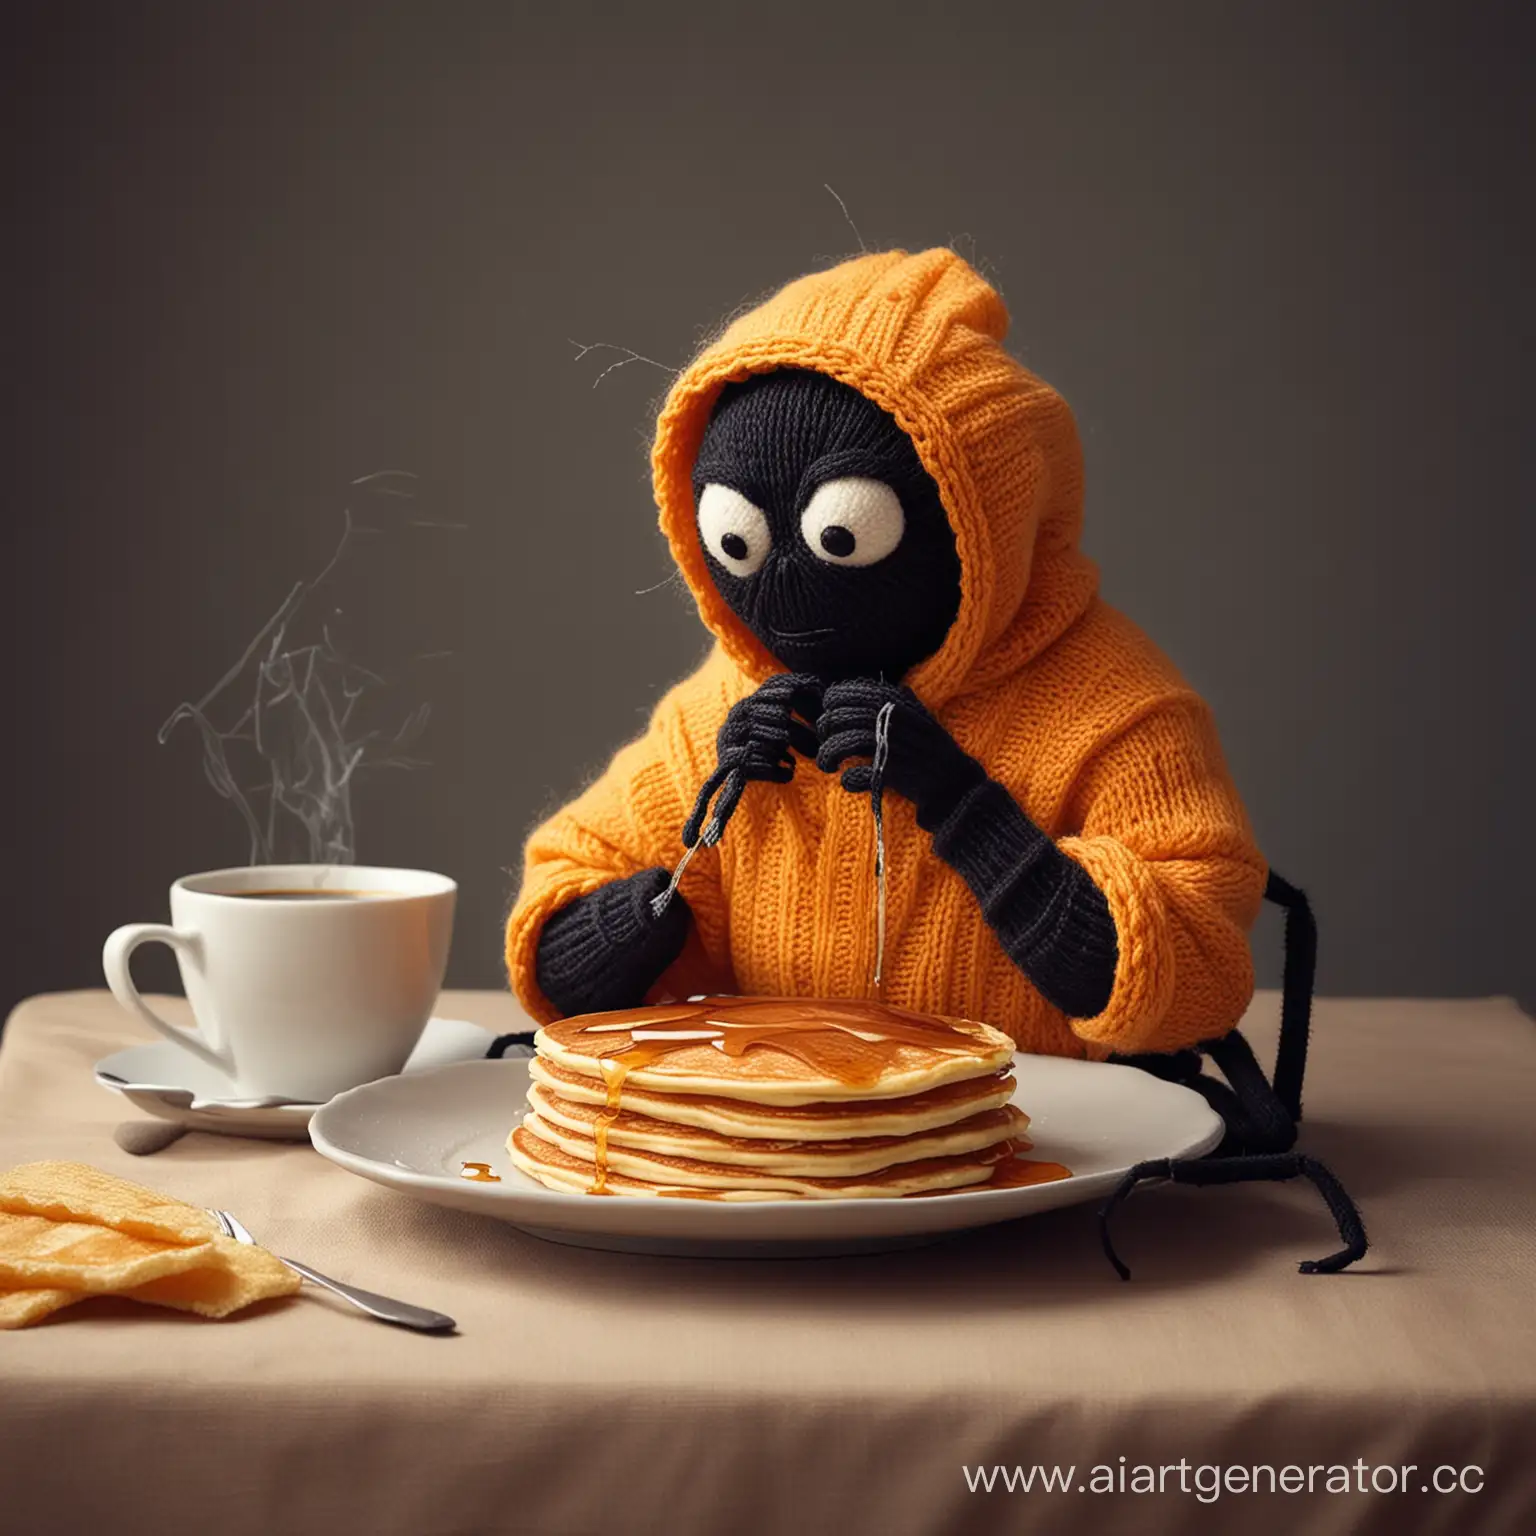 Spider-Eating-Pancakes-and-Knitting-a-Sweater